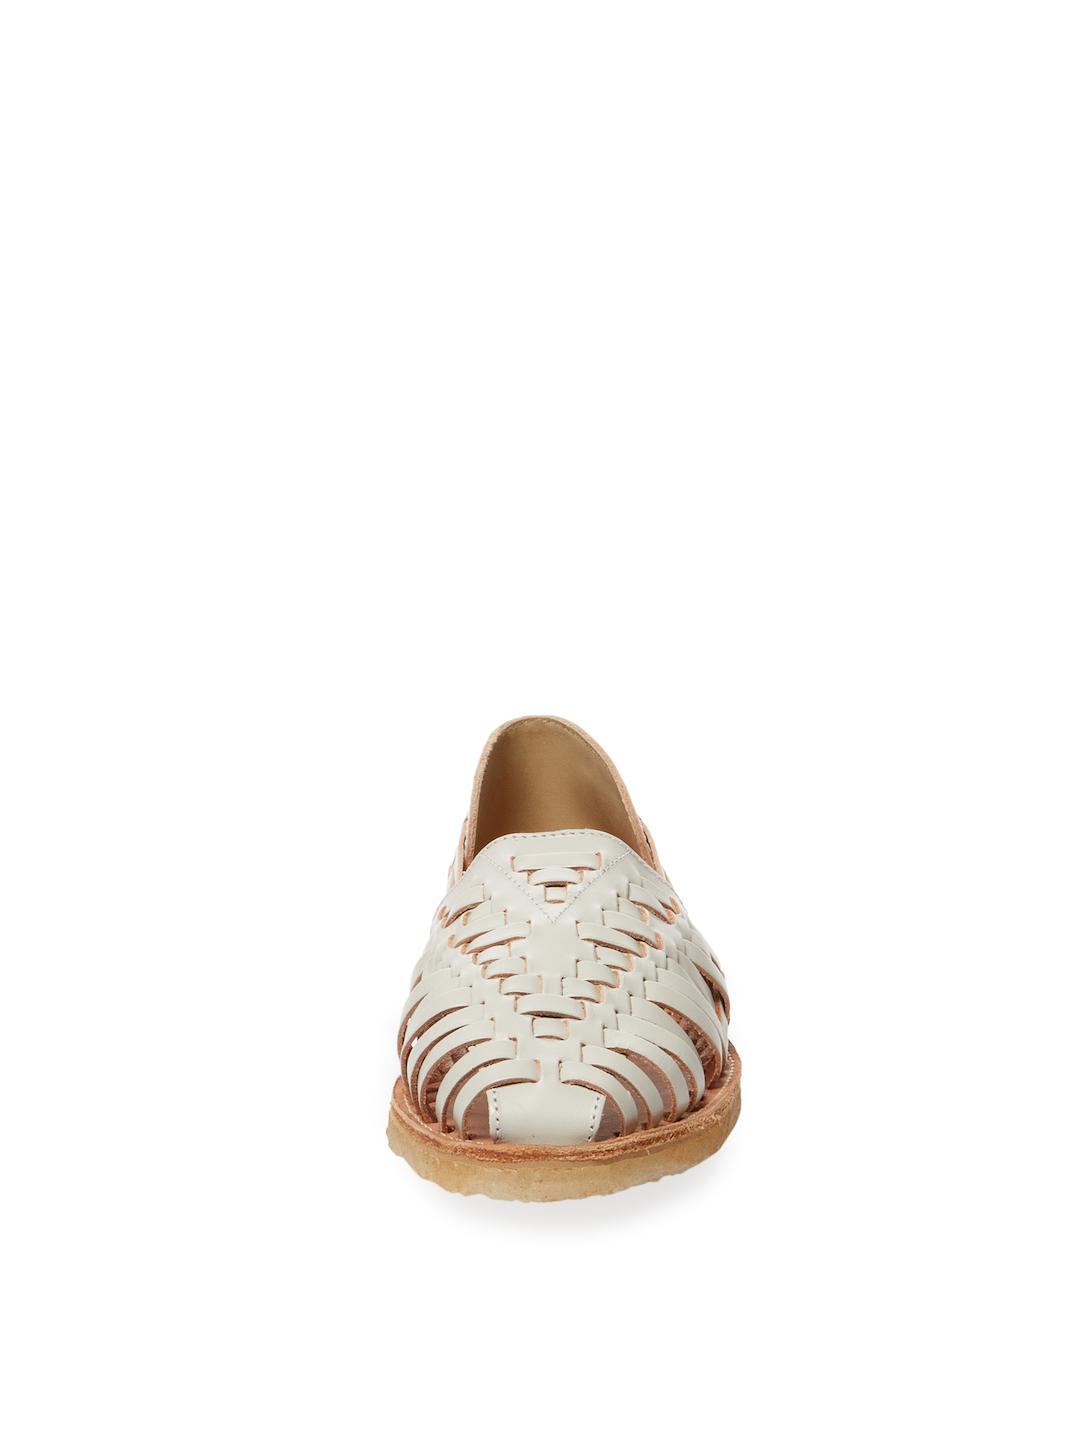 TOMS Mexico Leather Huarache Sandal | Lyst